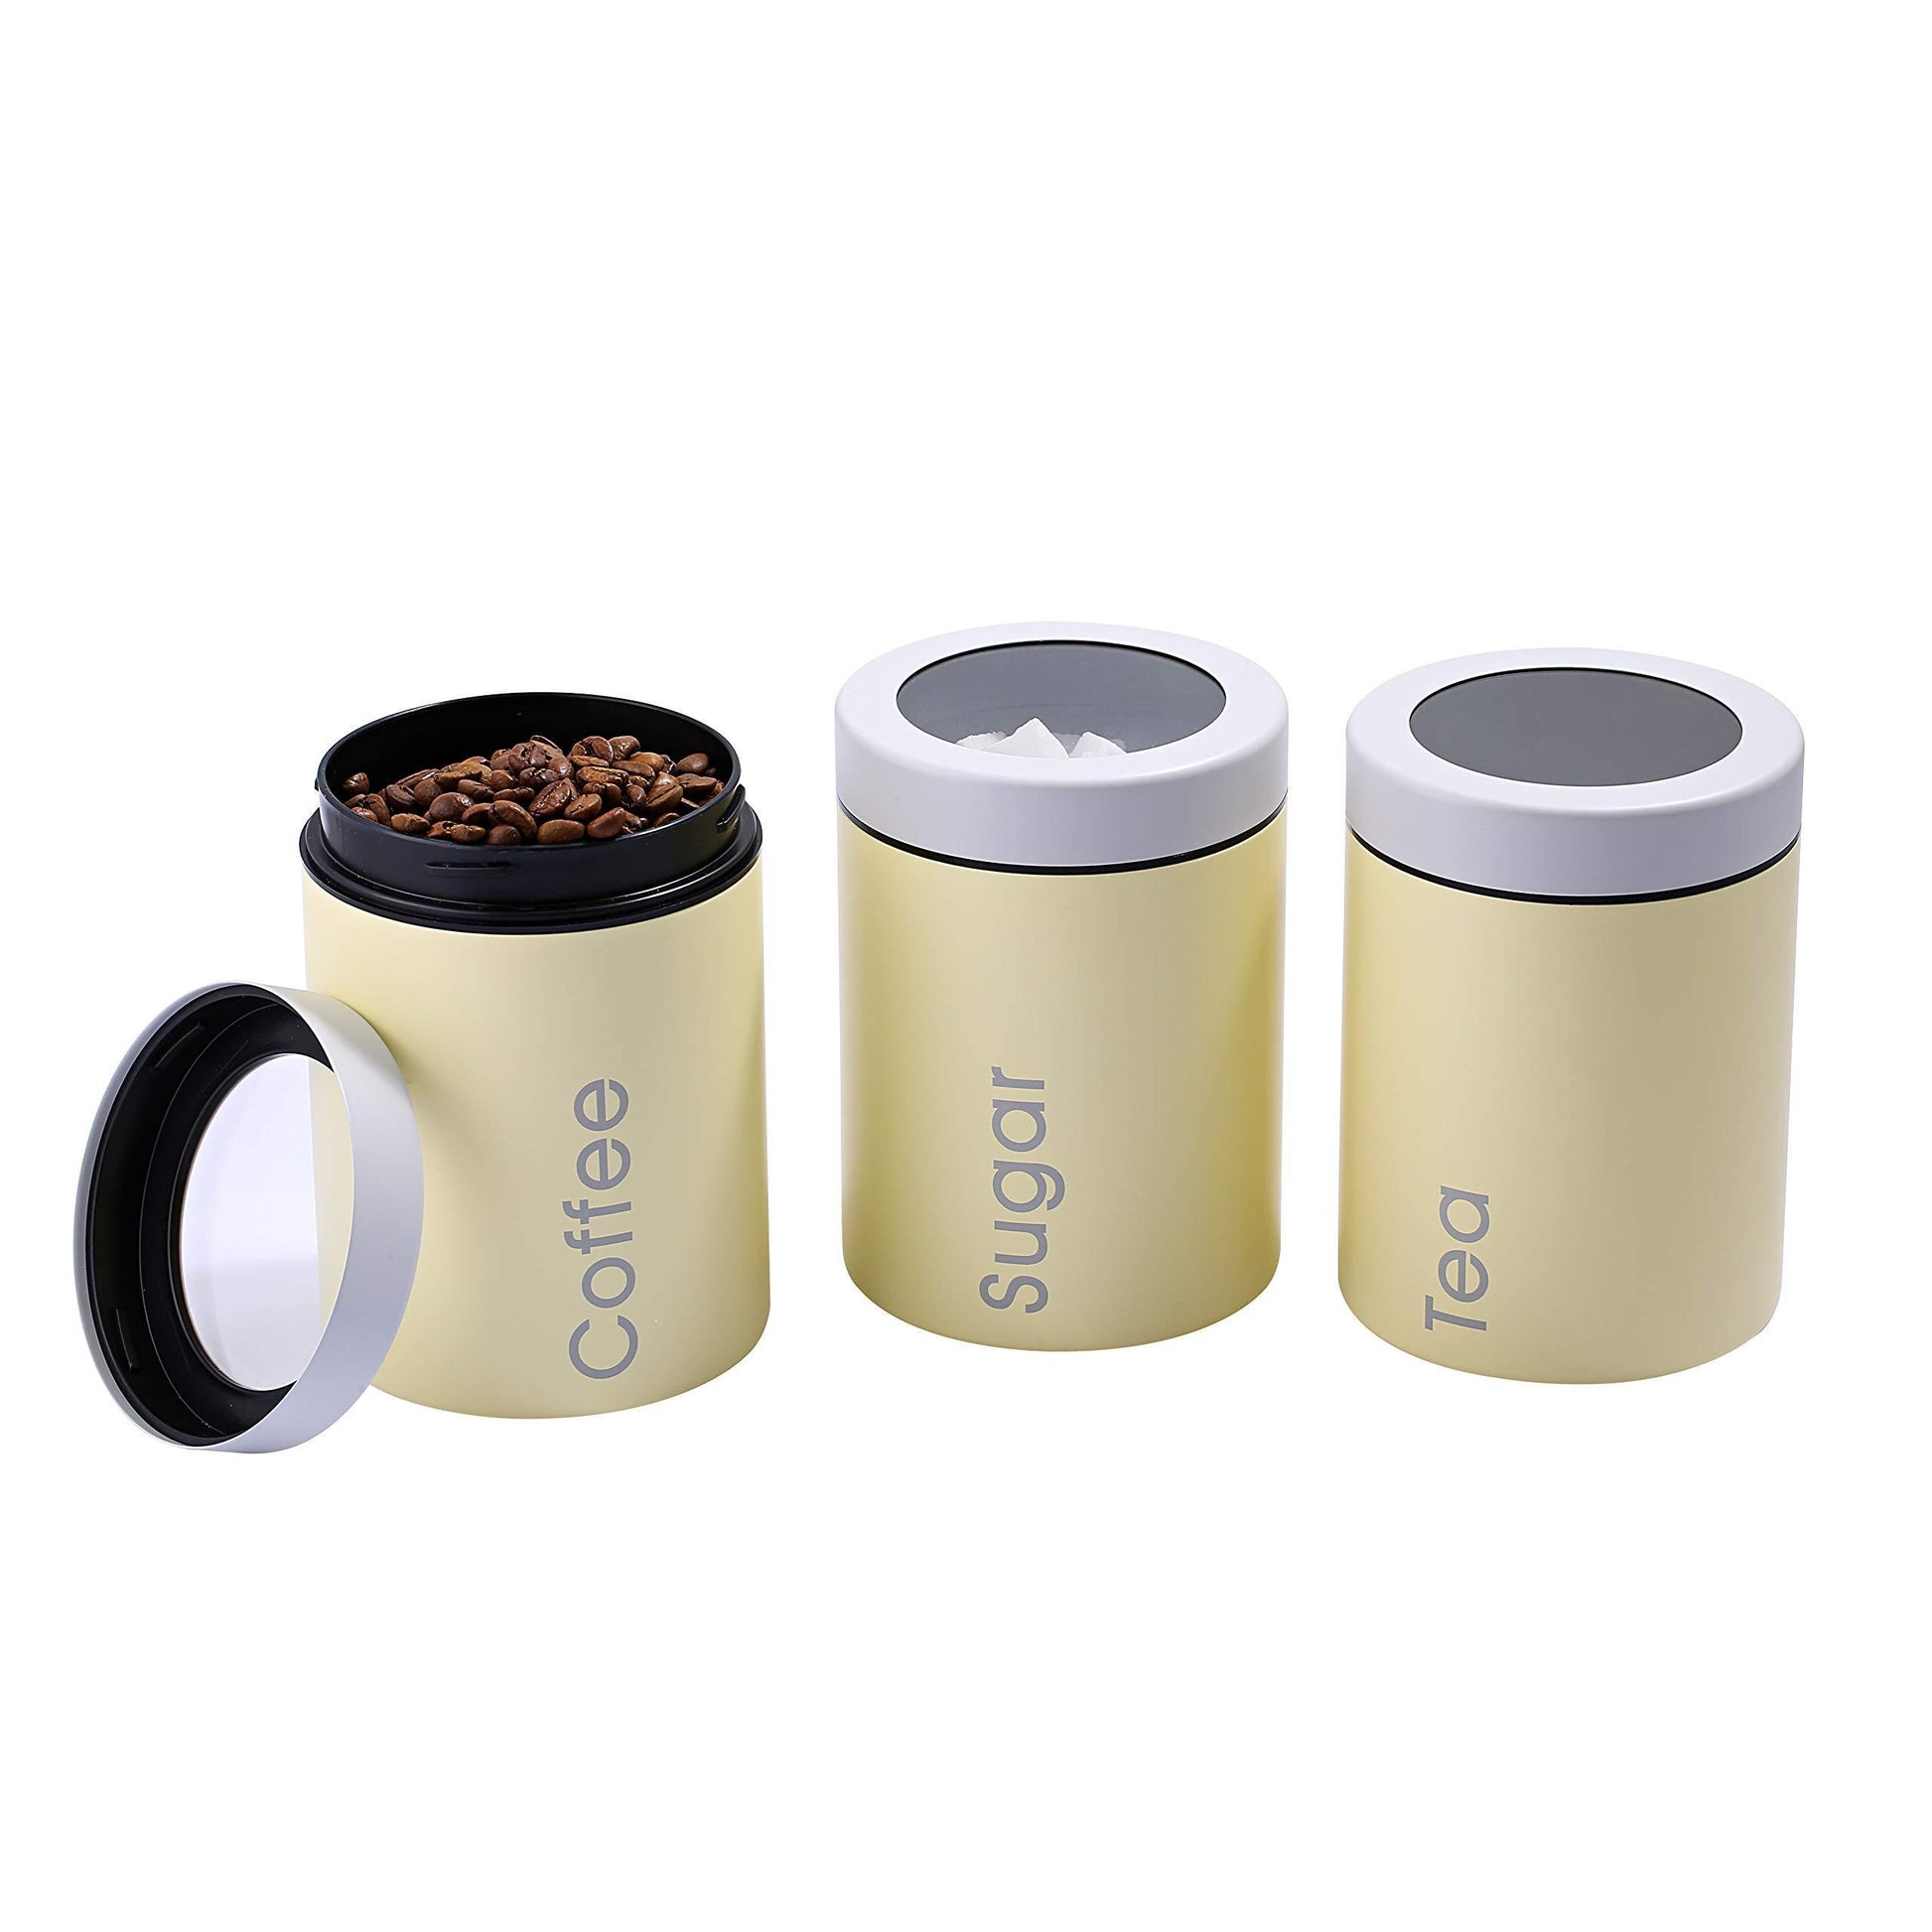 Latest adzukio modern stylish canisters sets for kitchen counter 3 piece canister for tea sugar coffee food storage container multipurpose light yellow